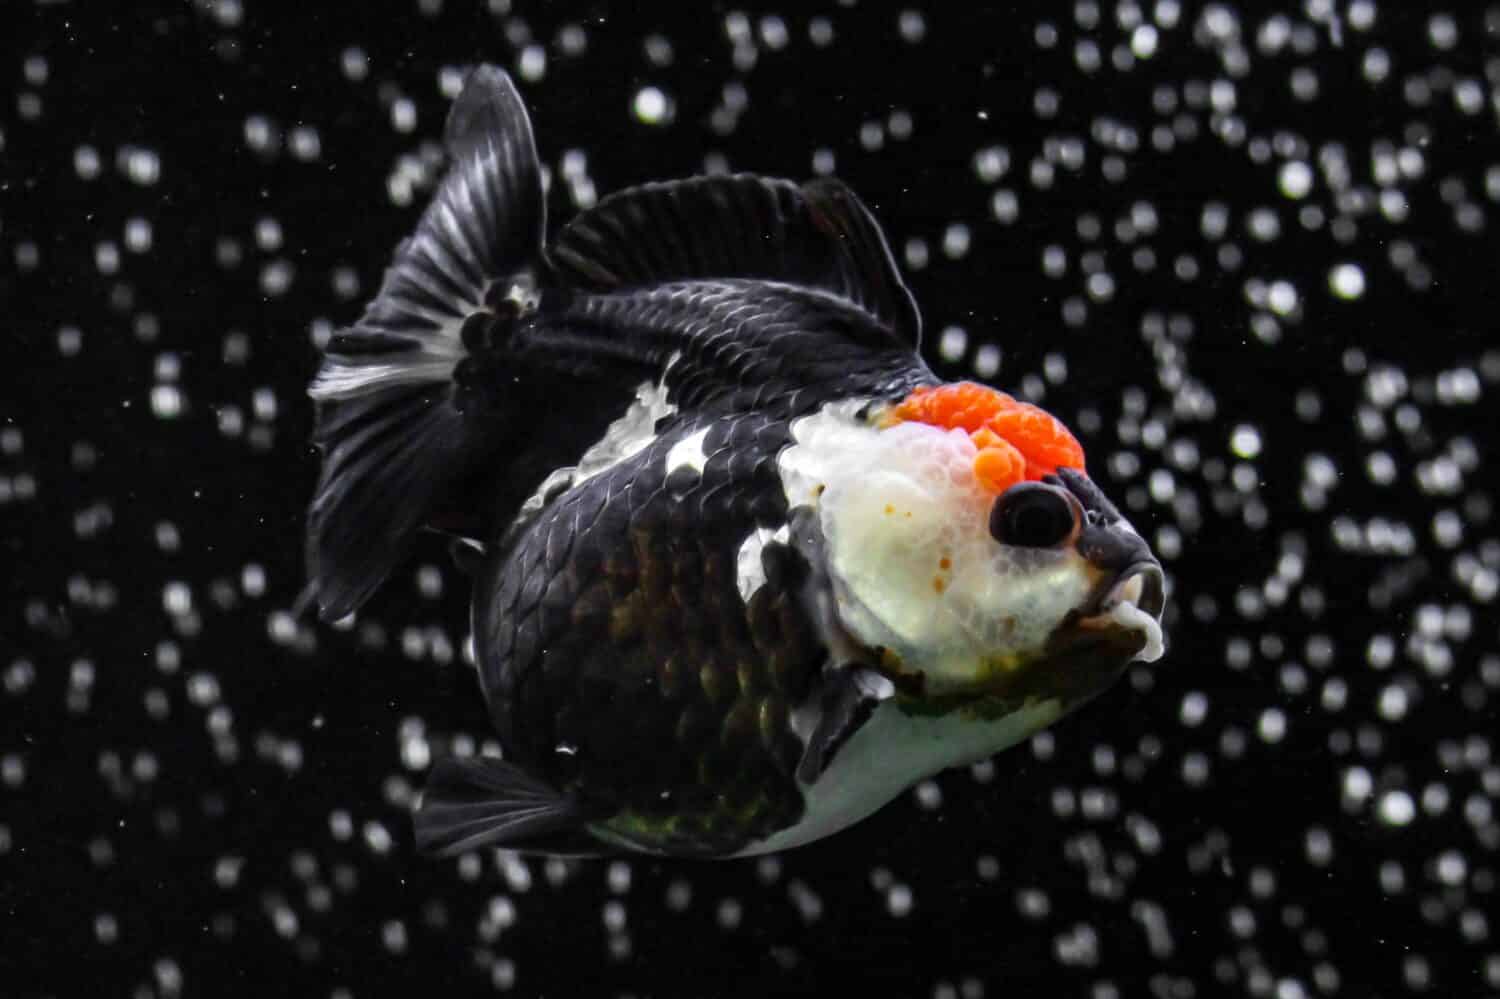 Goldfish commonly Oranda Panda Tricolor in an aquarium with bubbles in the water, Blurred Noise Black Background